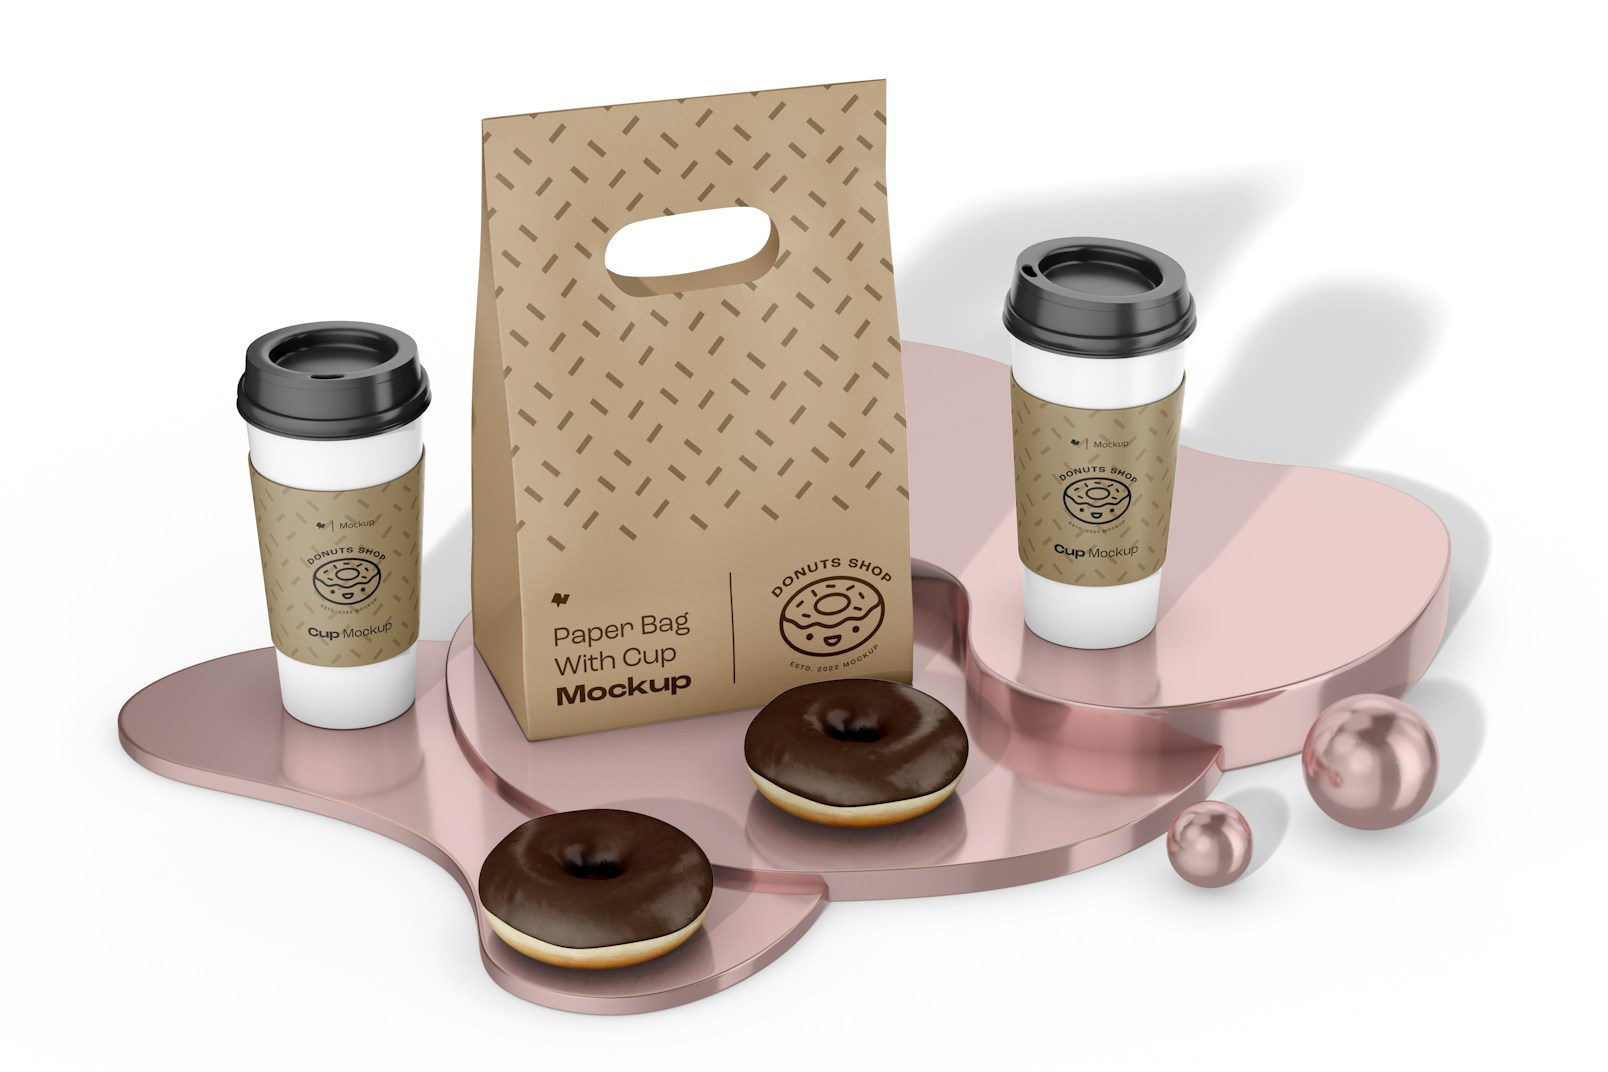 Paper Bag with Cups Mockup